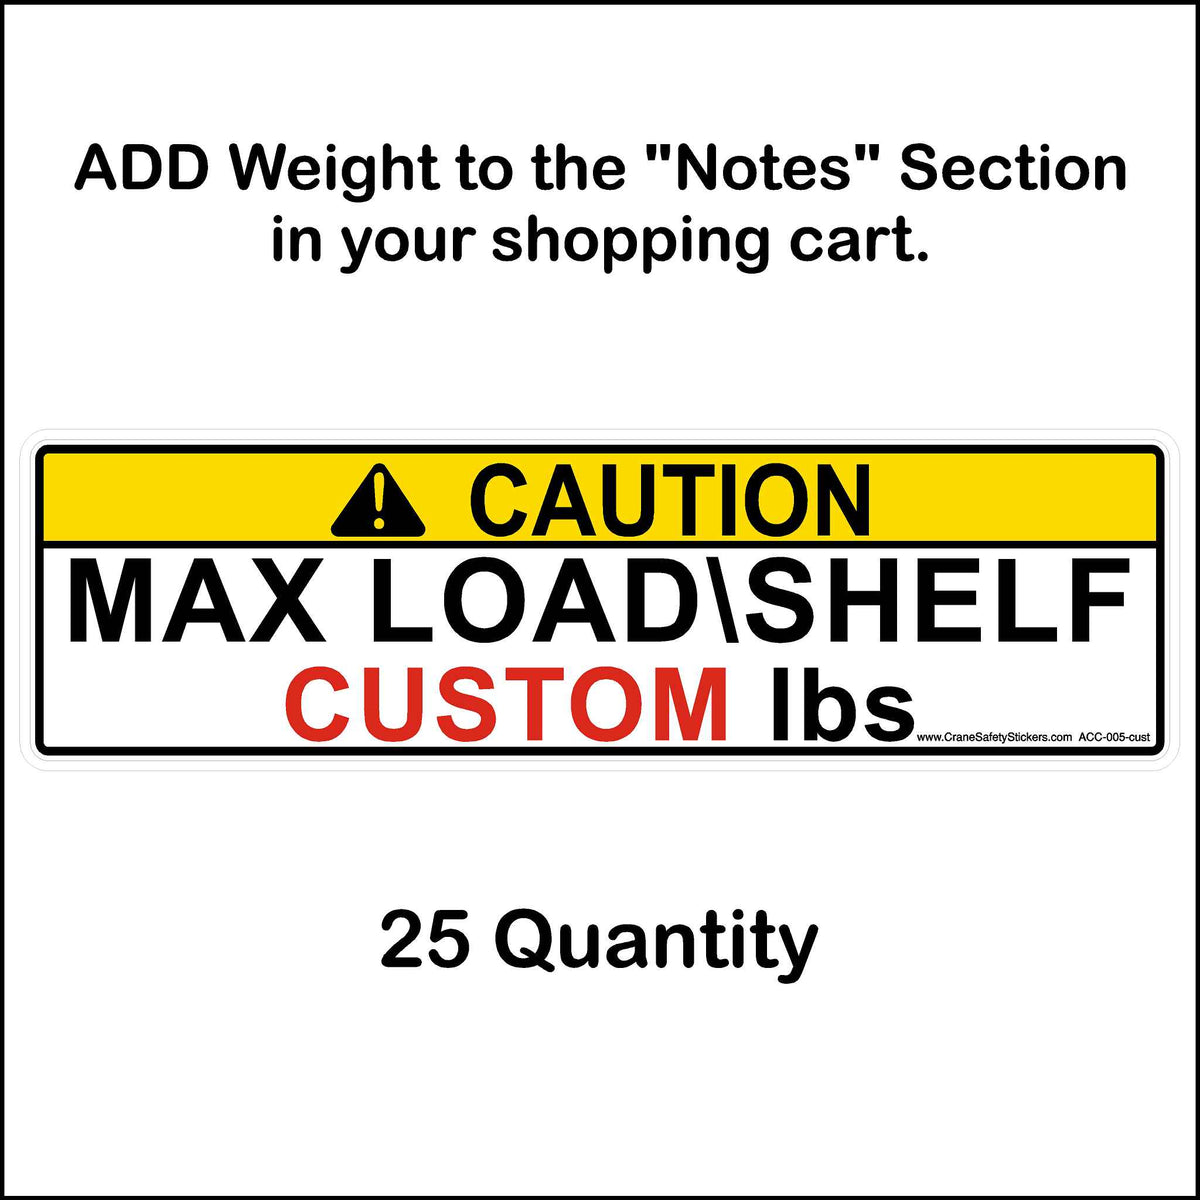 Custom, add your own weight to this maximum load shelf pallet rack label 25 quantity.